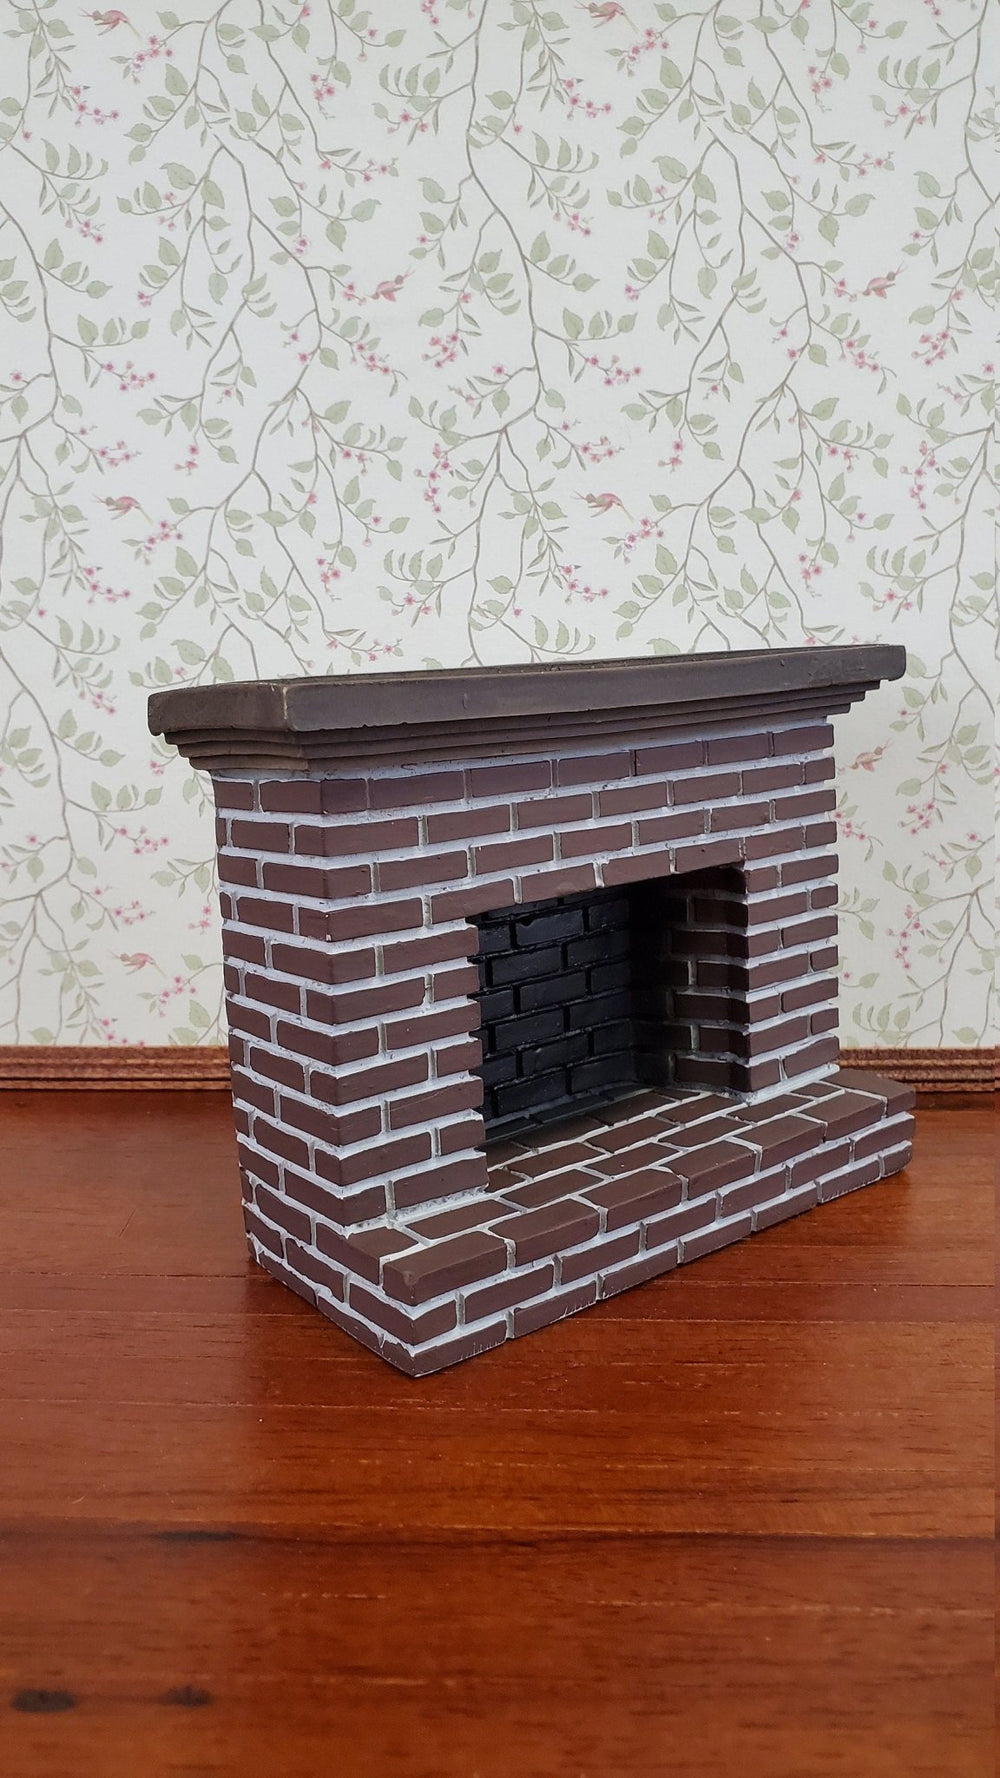 Dollhouse Fireplace Brick Old Colonial Style 1:12 Scale Miniature - Miniature Crush